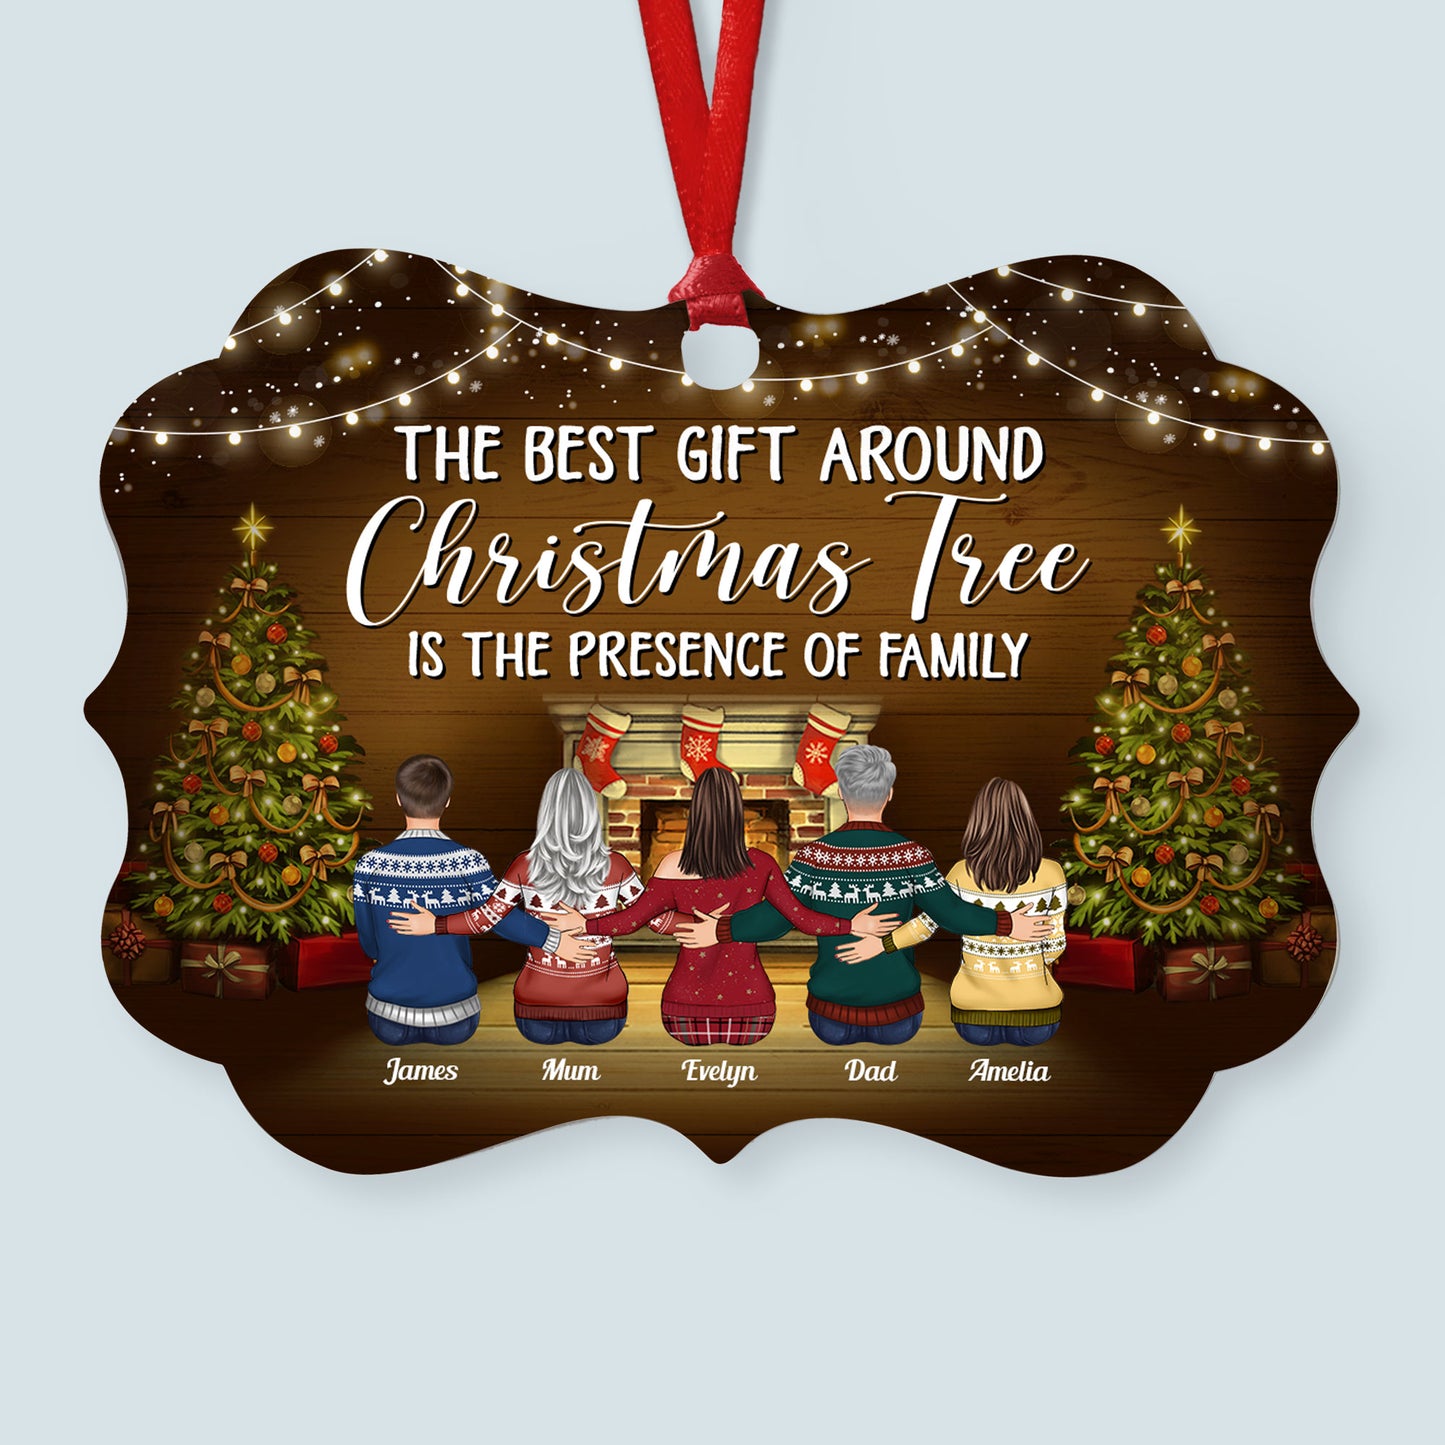 The Best Gift Around Christmas Tree Is Family - Personalized Aluminum Ornament - Christmas Gift For Dad, Mom, Siblings - Family Hugging